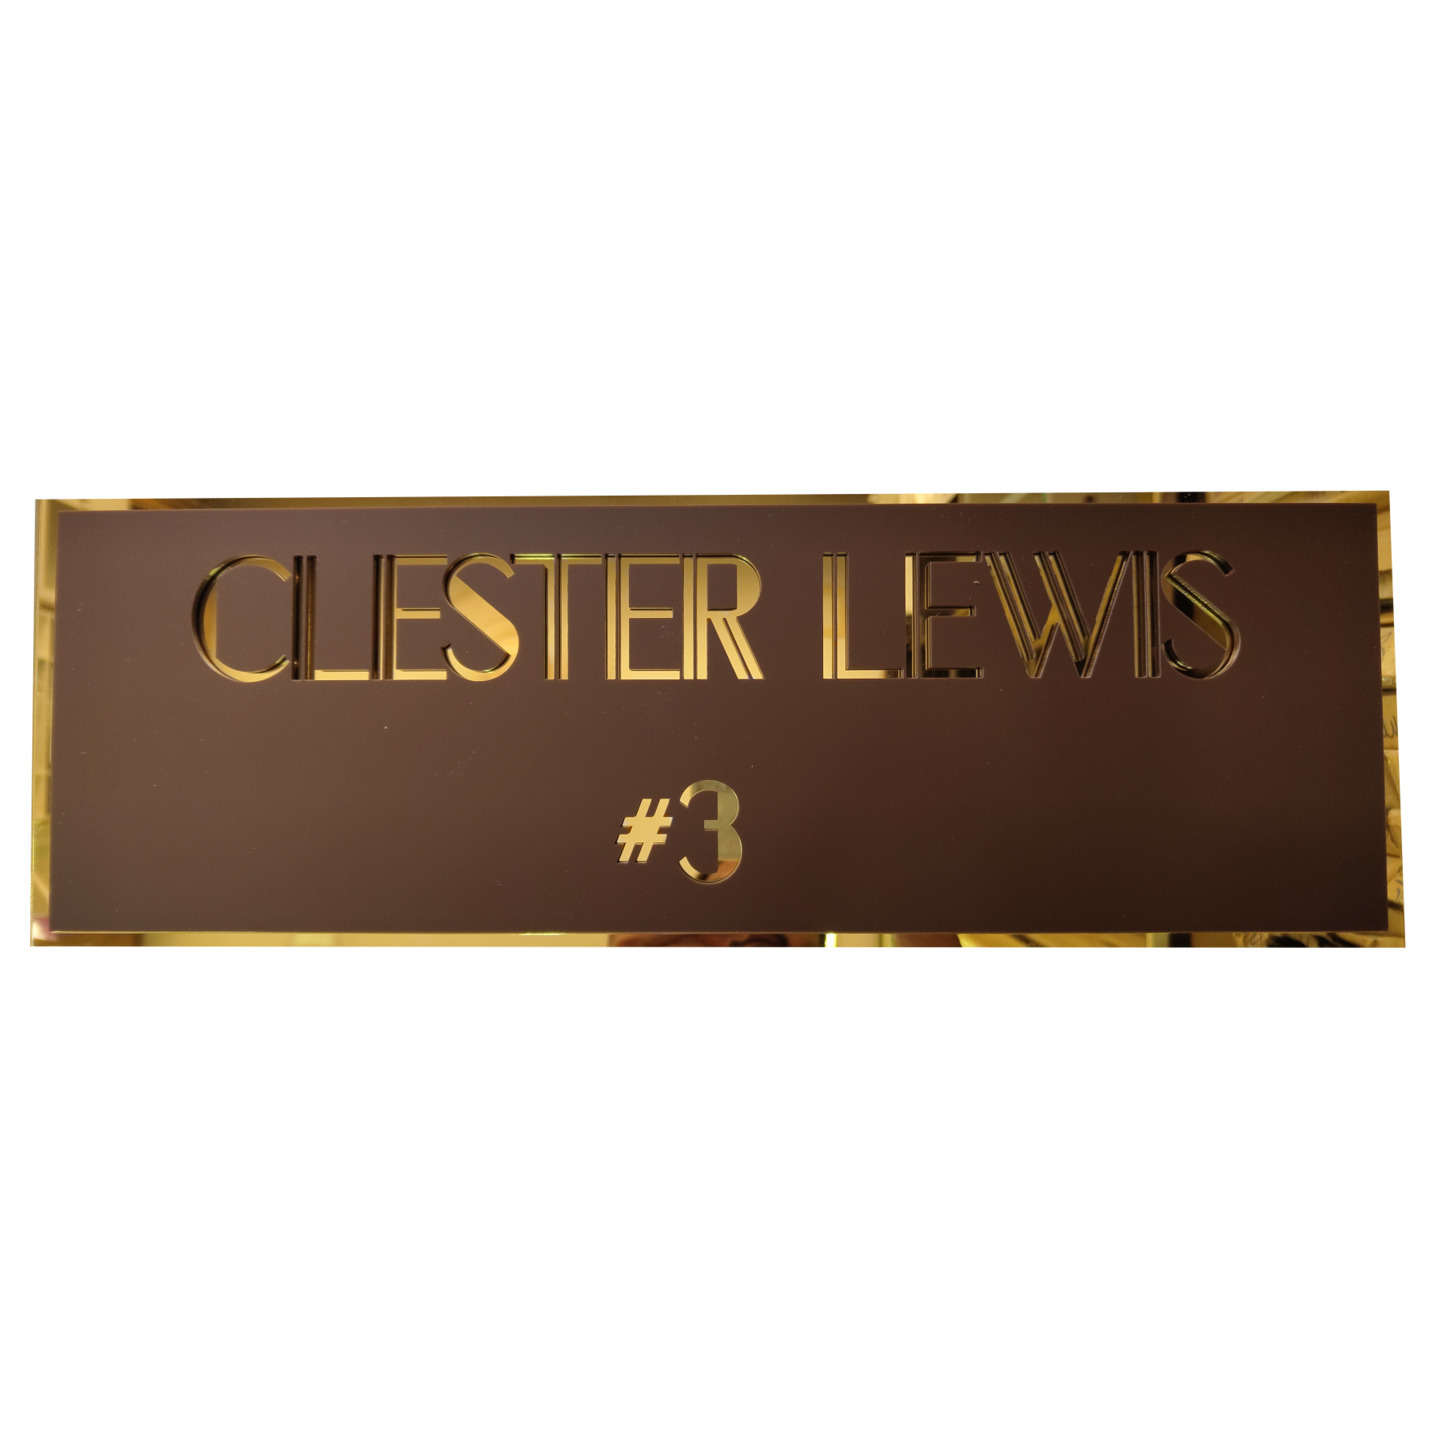 Clester Lewis